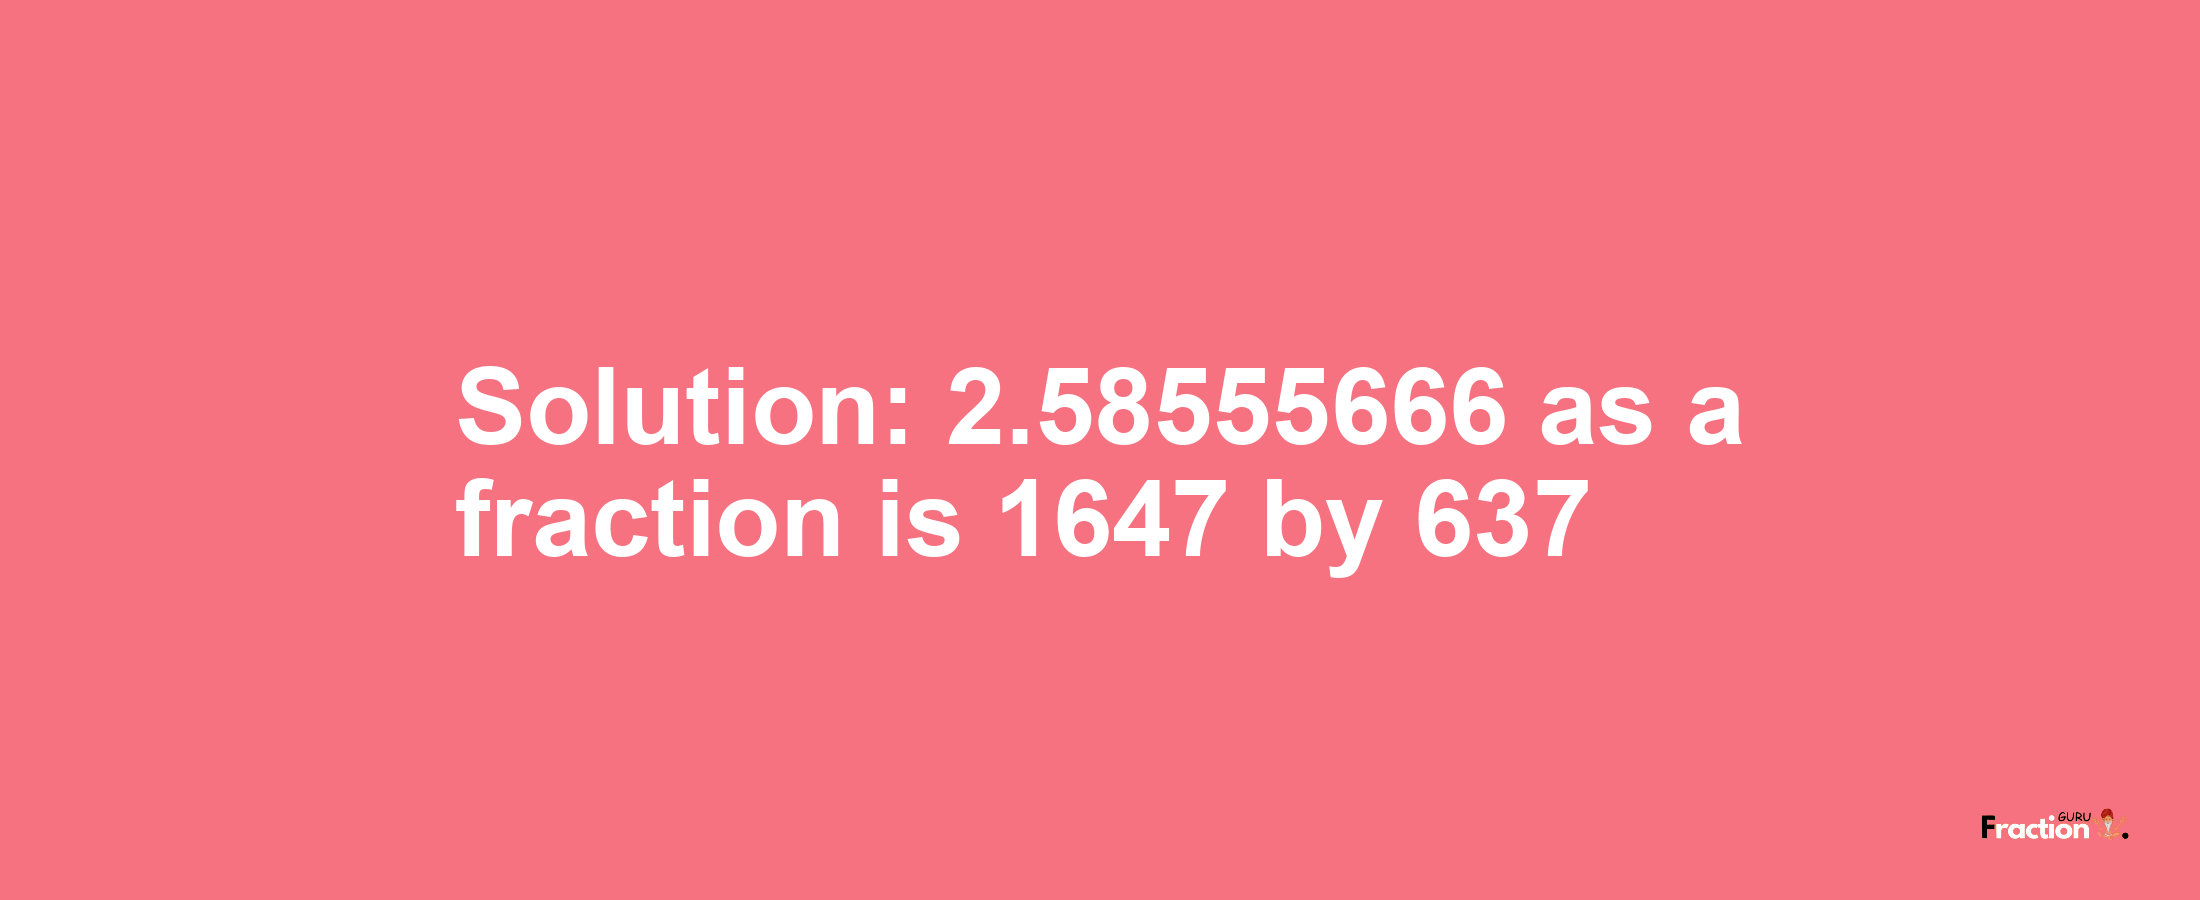 Solution:2.58555666 as a fraction is 1647/637